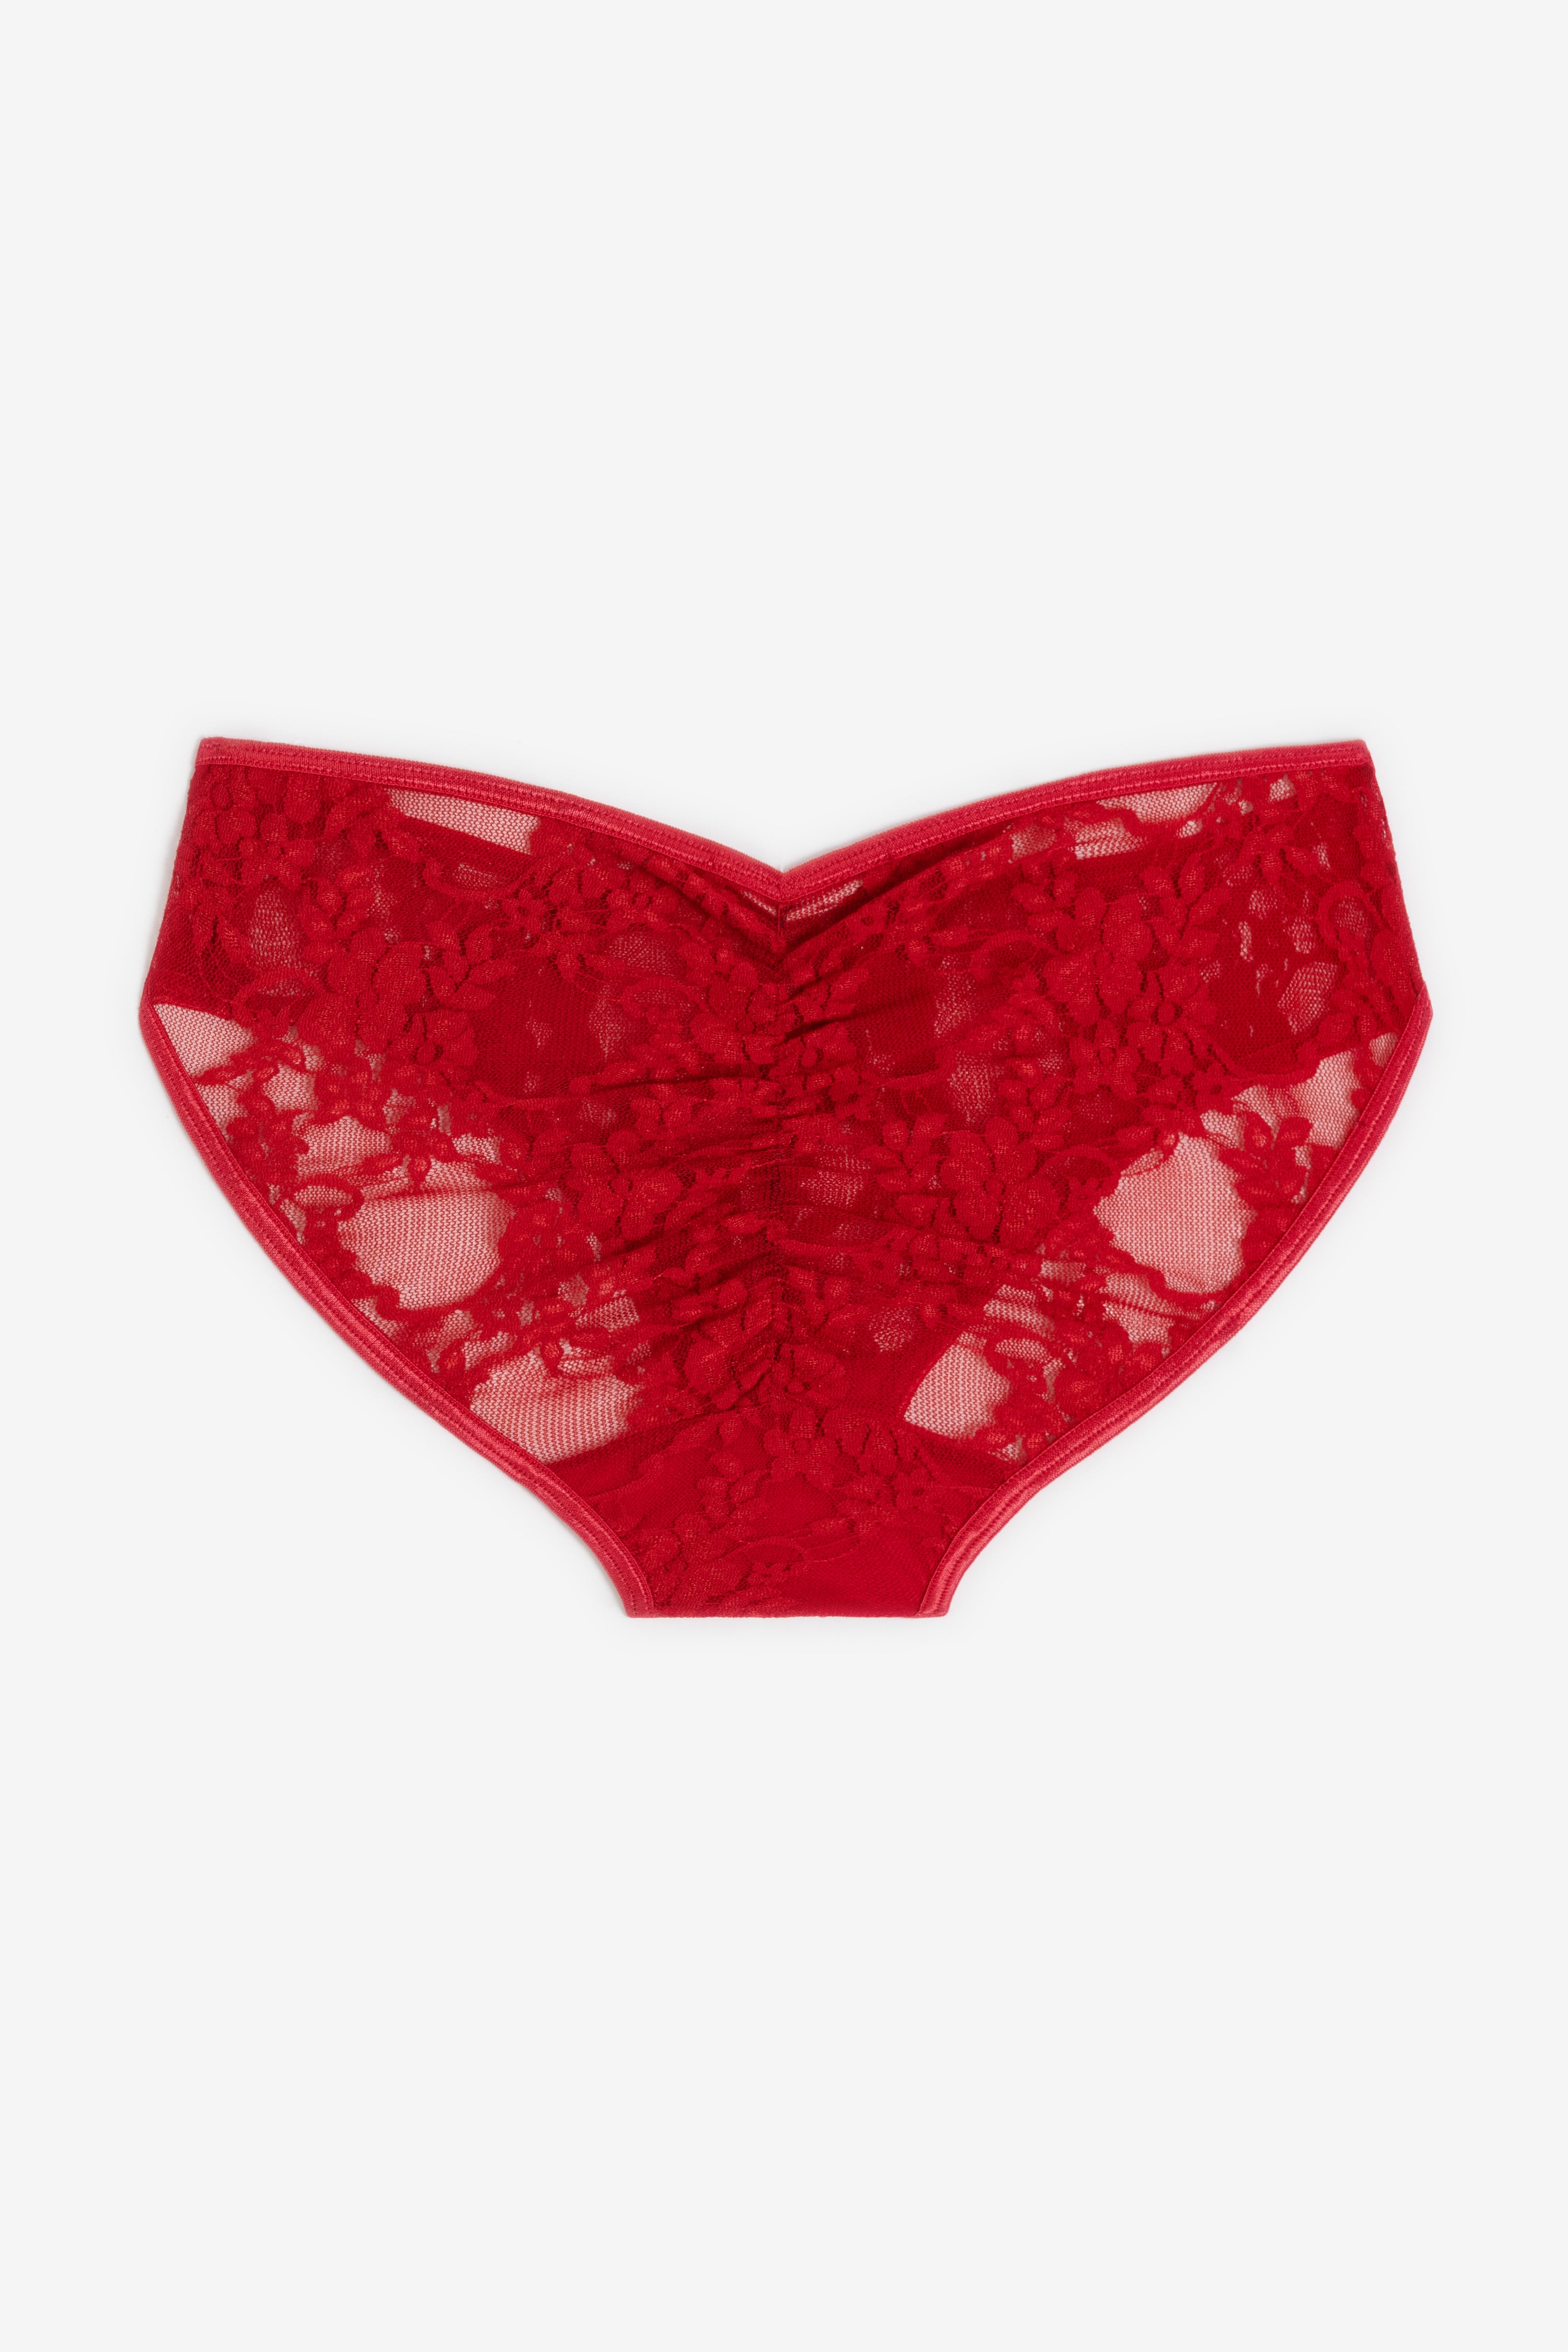 Buy Fishnet Floral Cheeky Panty